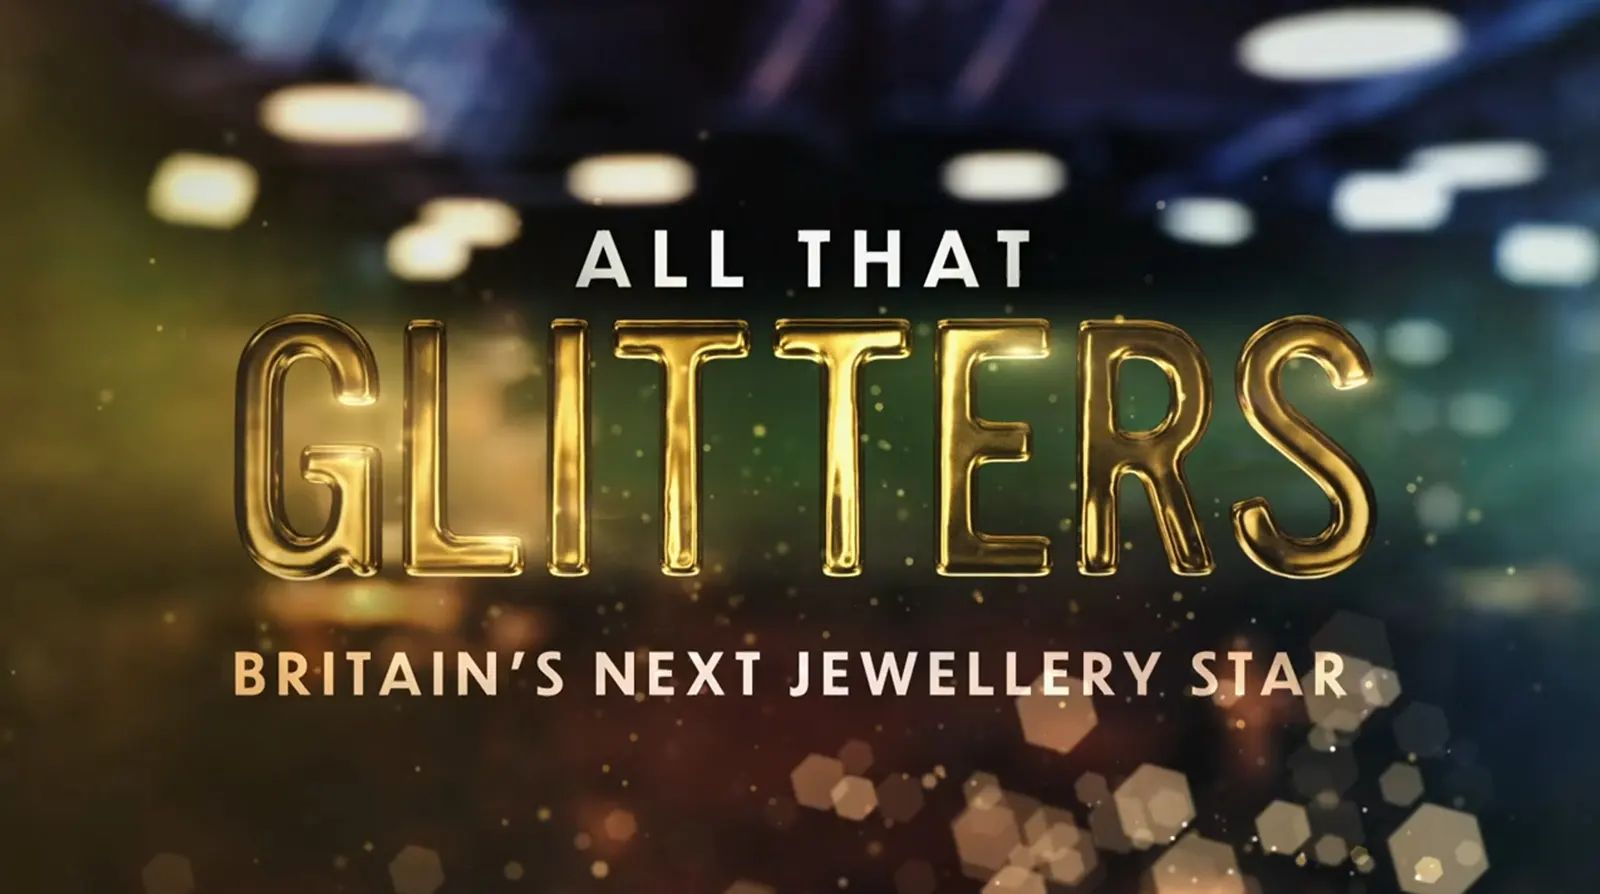 New BBC Show 'All That Glitters' Is Like 'Bake Off' For Jewellery